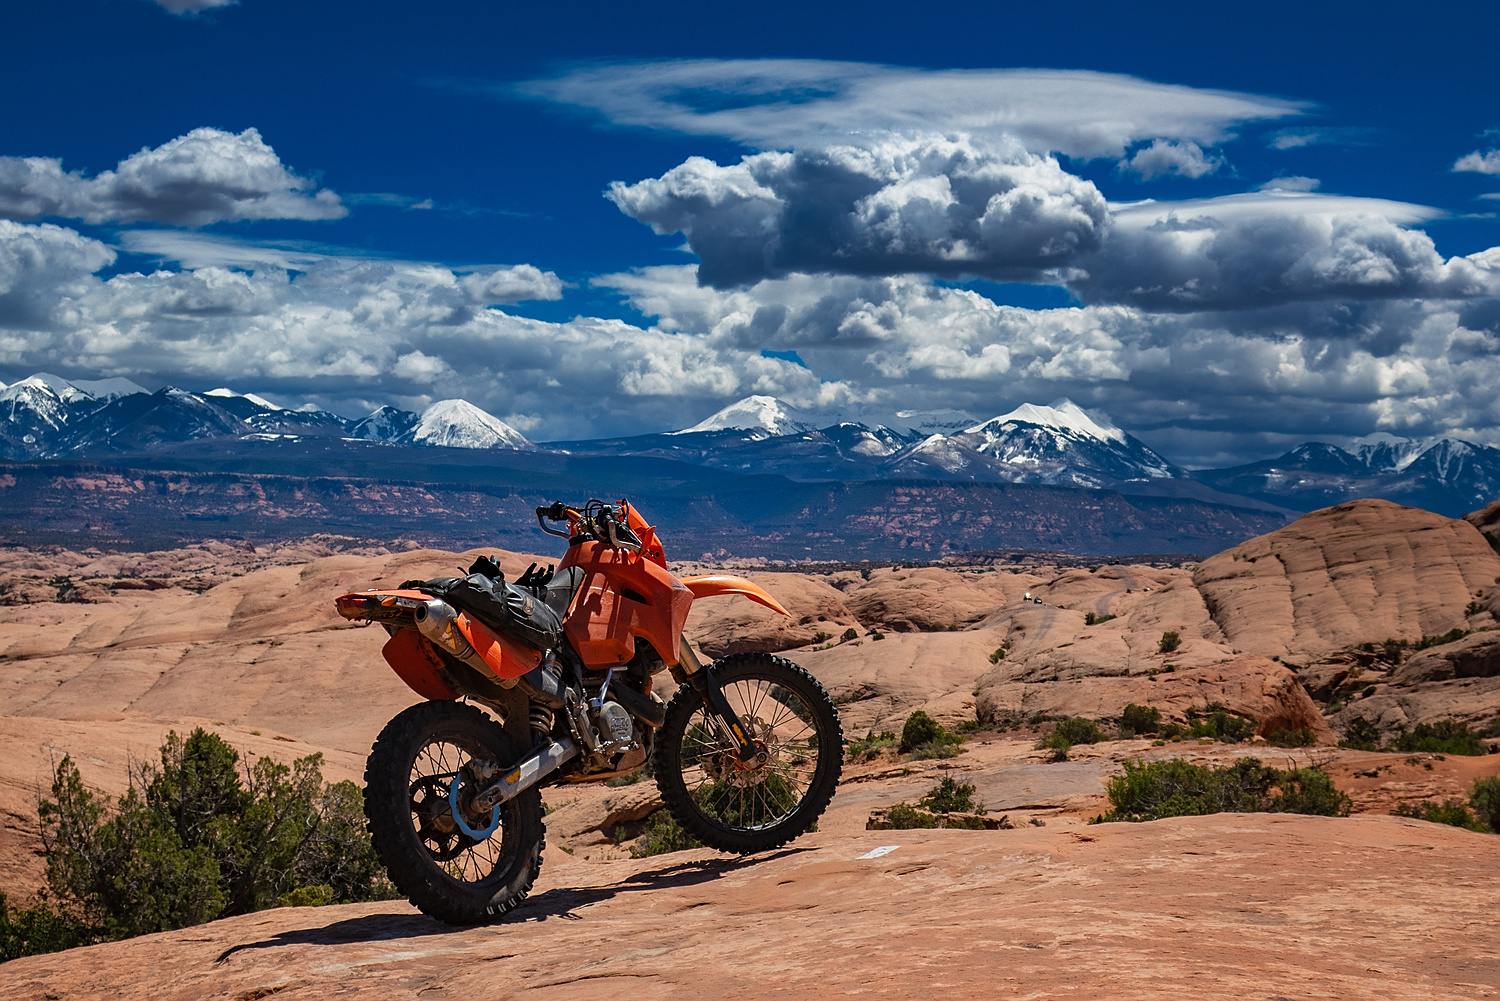 motorcycle parked on slick rock with snowy mountains behind